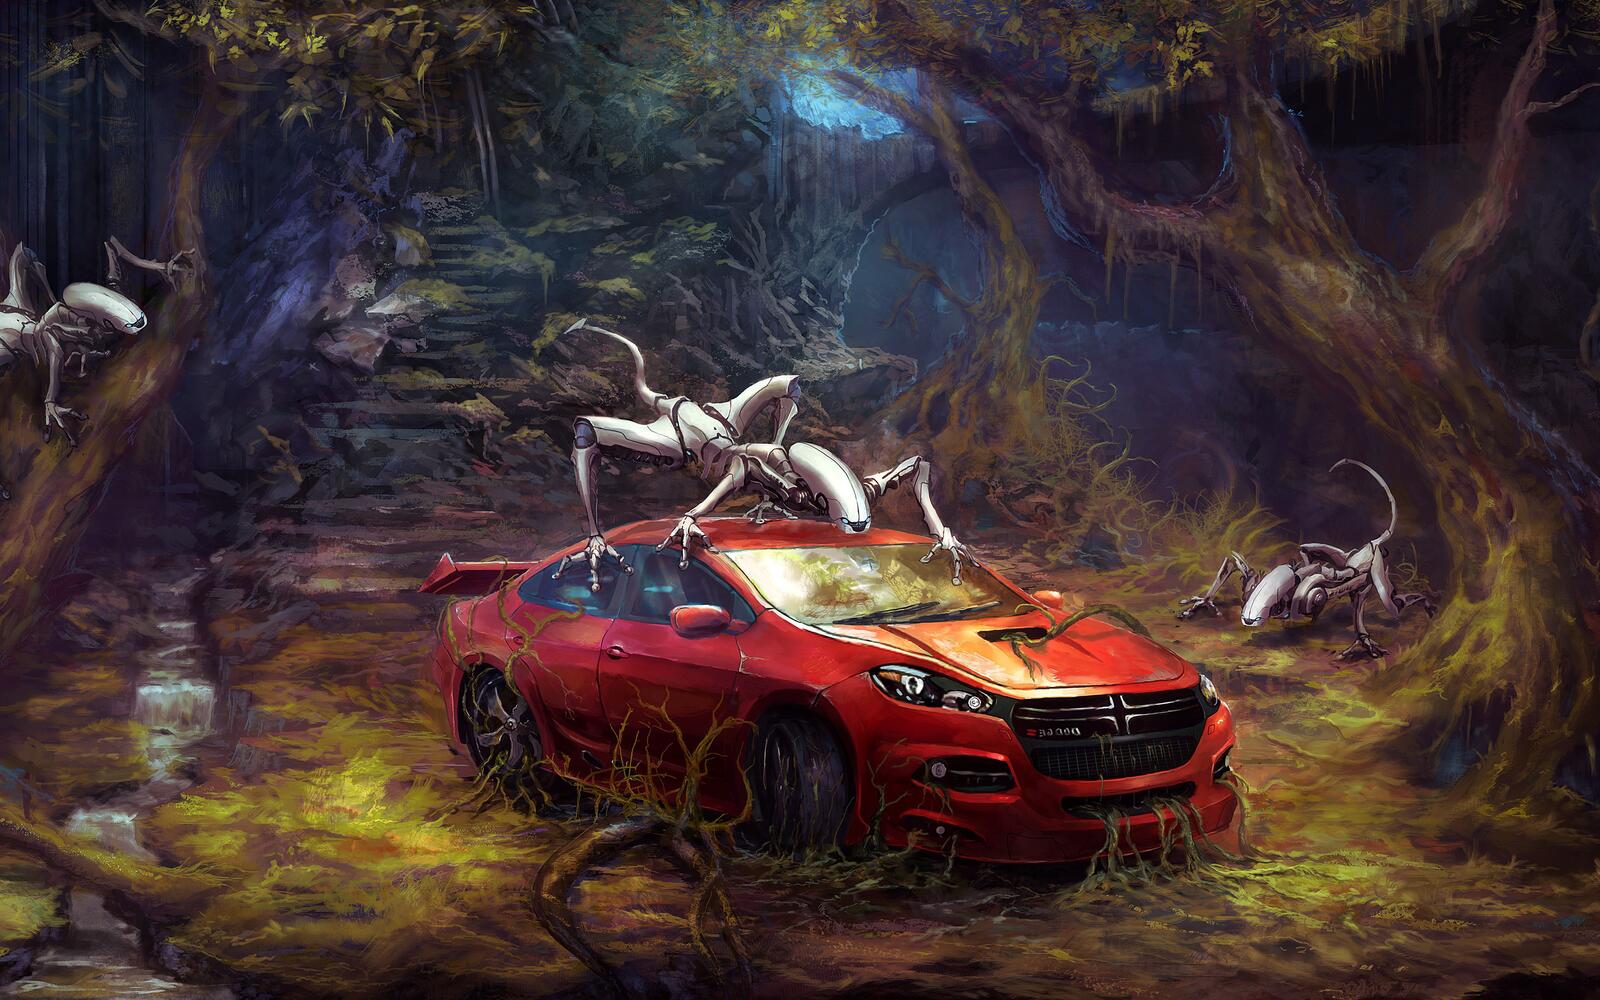 Free photo Aliens studying an abandoned red car that stands in the woods